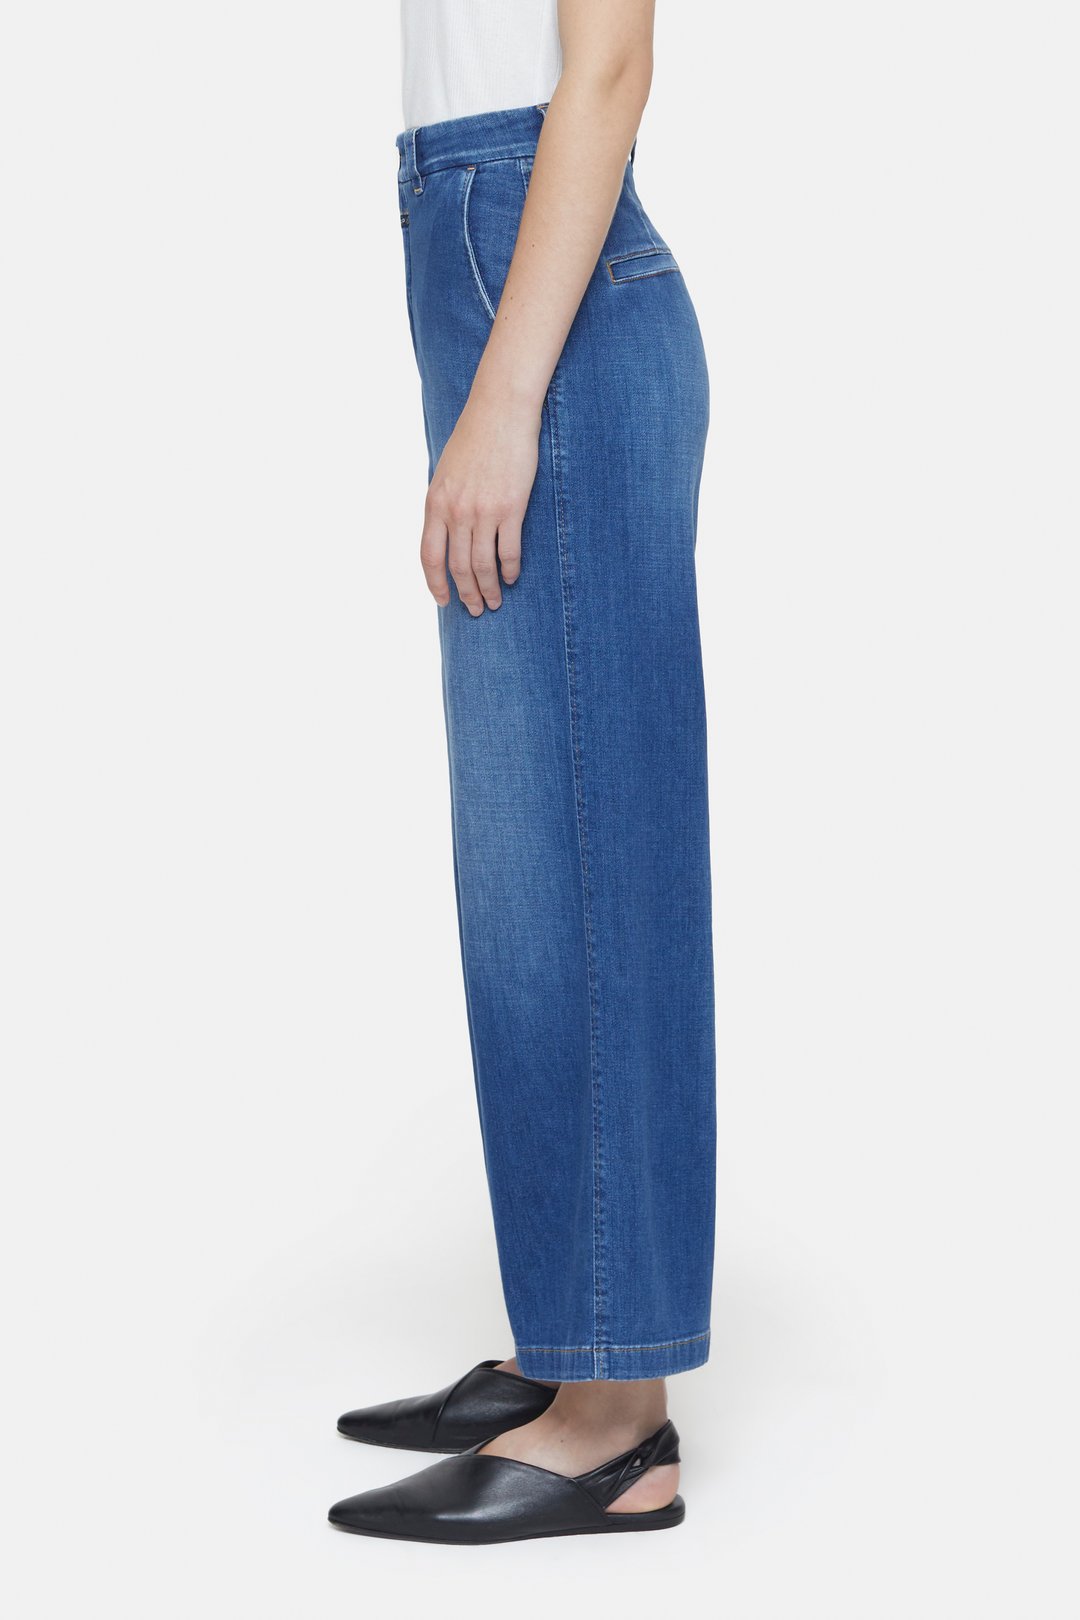 BARTON STYLE JEANS NAME | WIDE - CLOSED